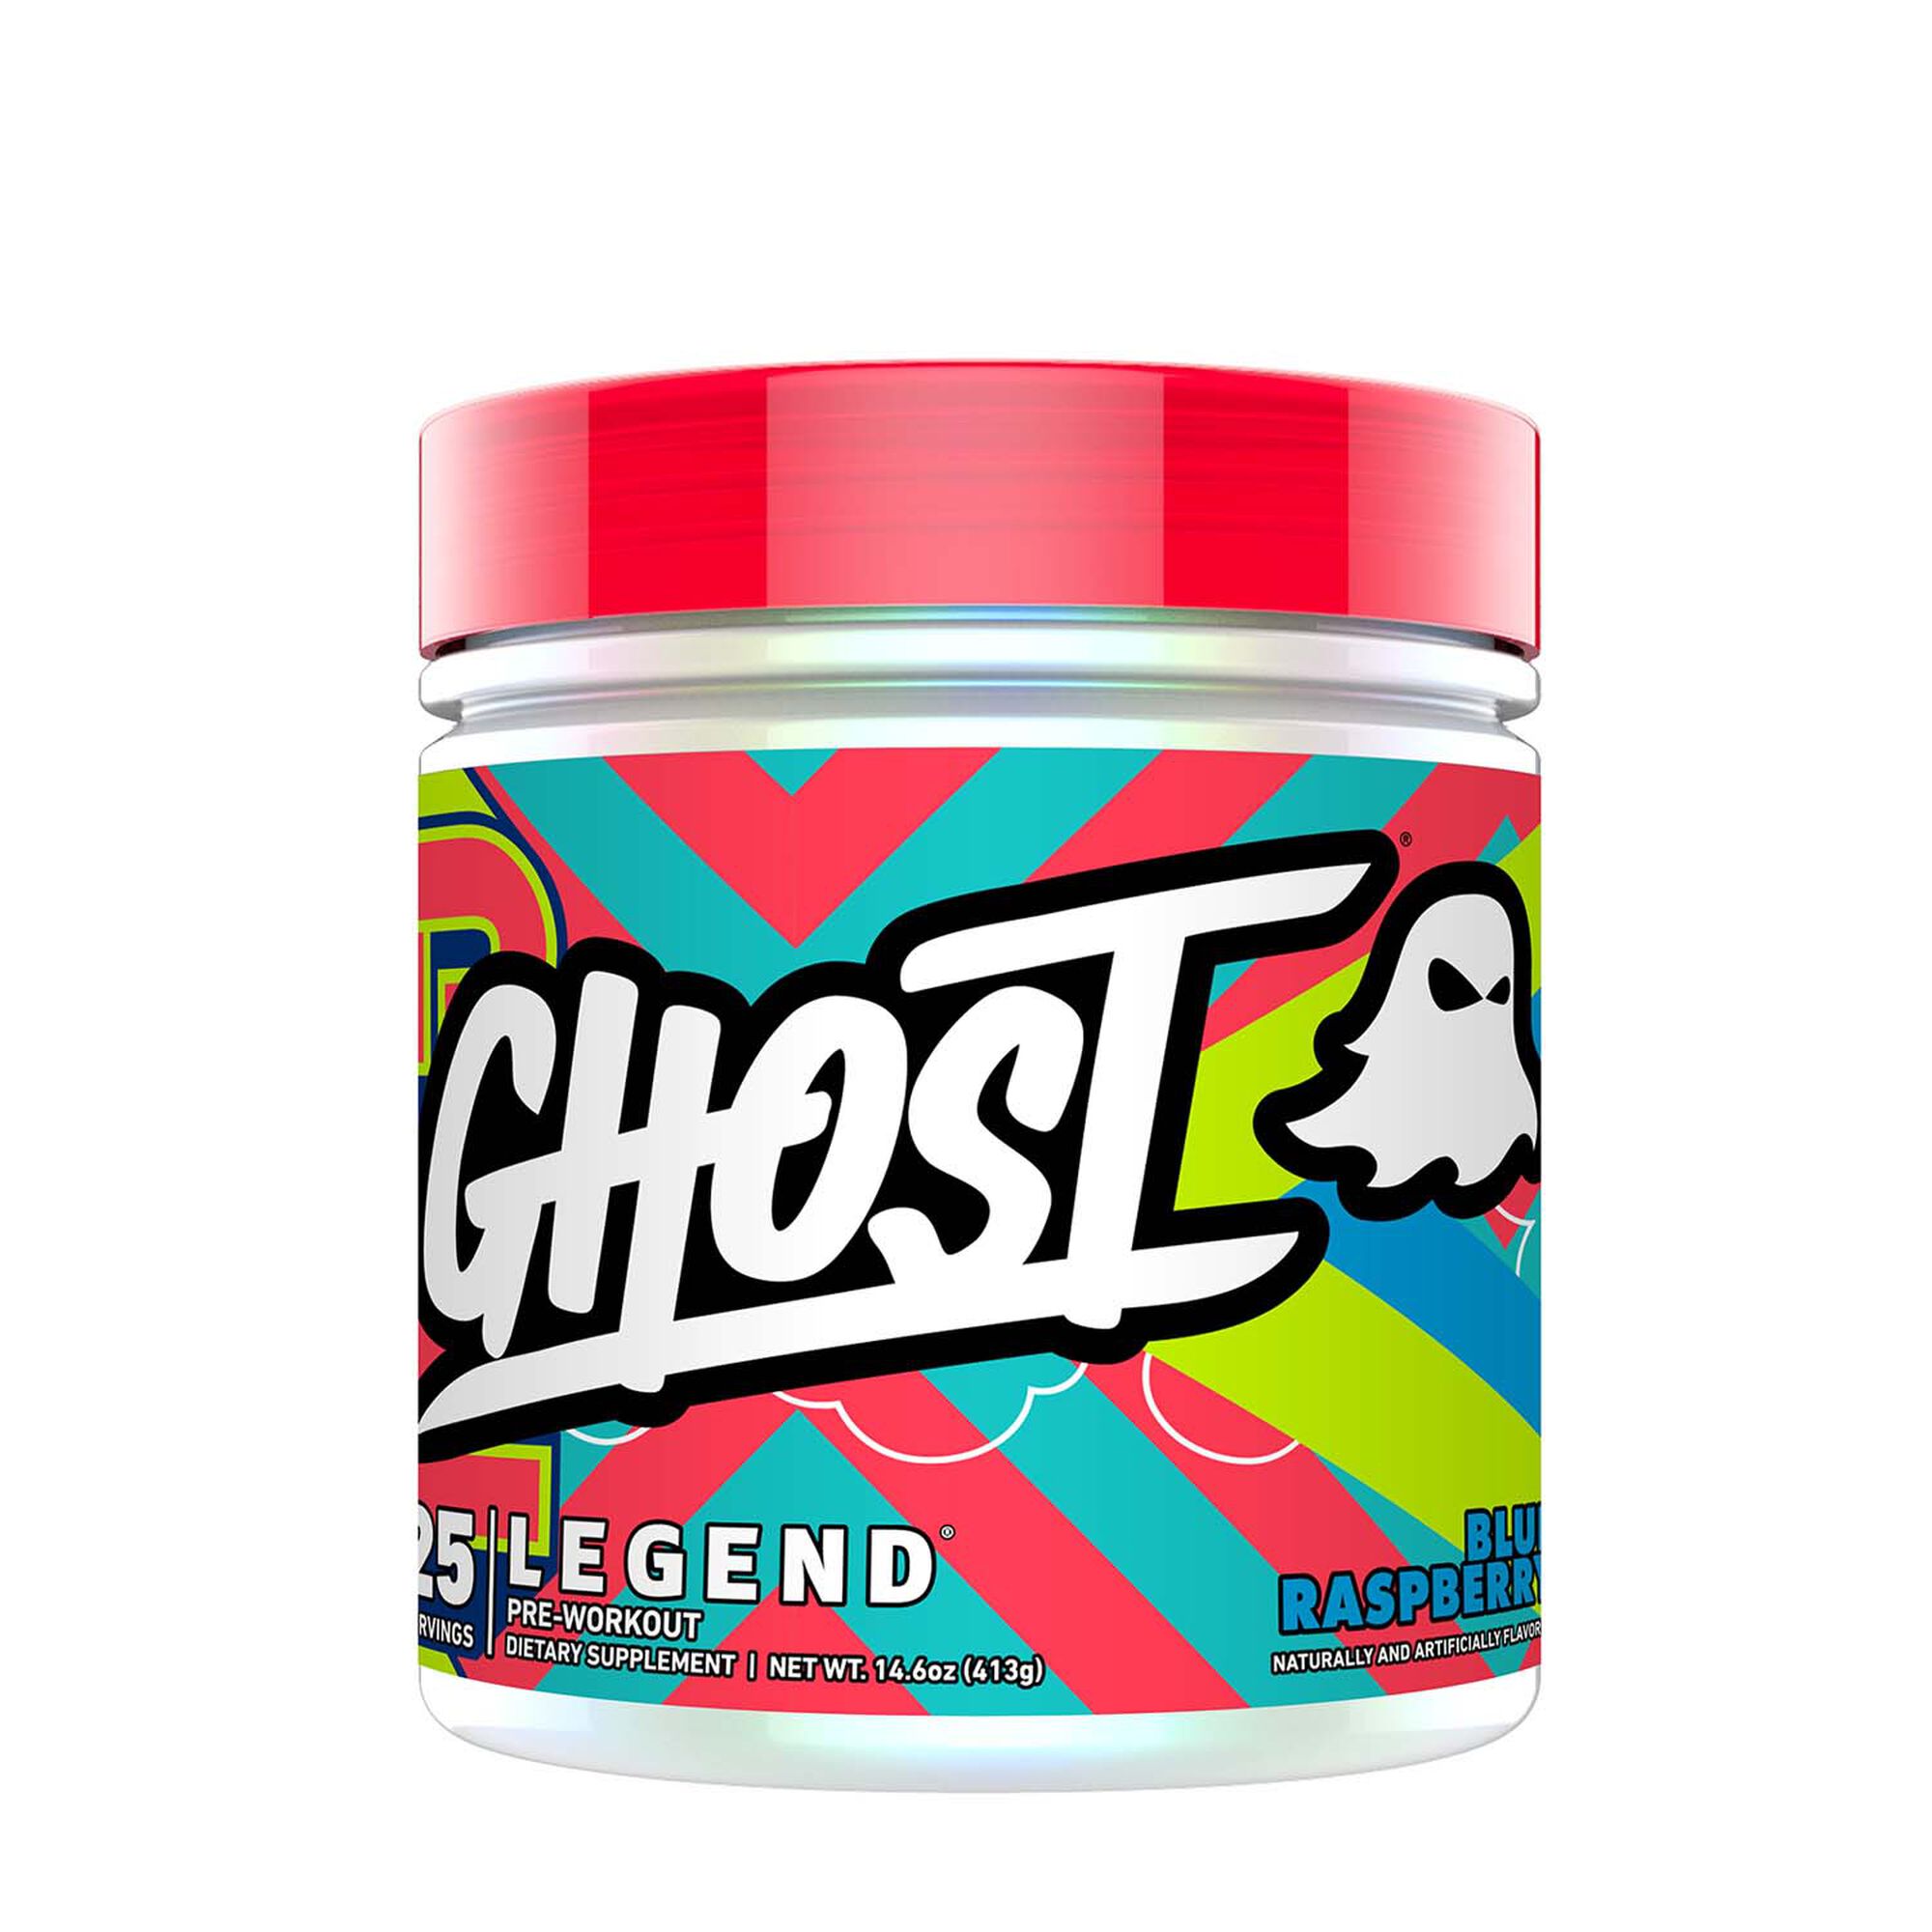 15 Minute Ghost legend pre workout blue raspberry with Comfort Workout Clothes